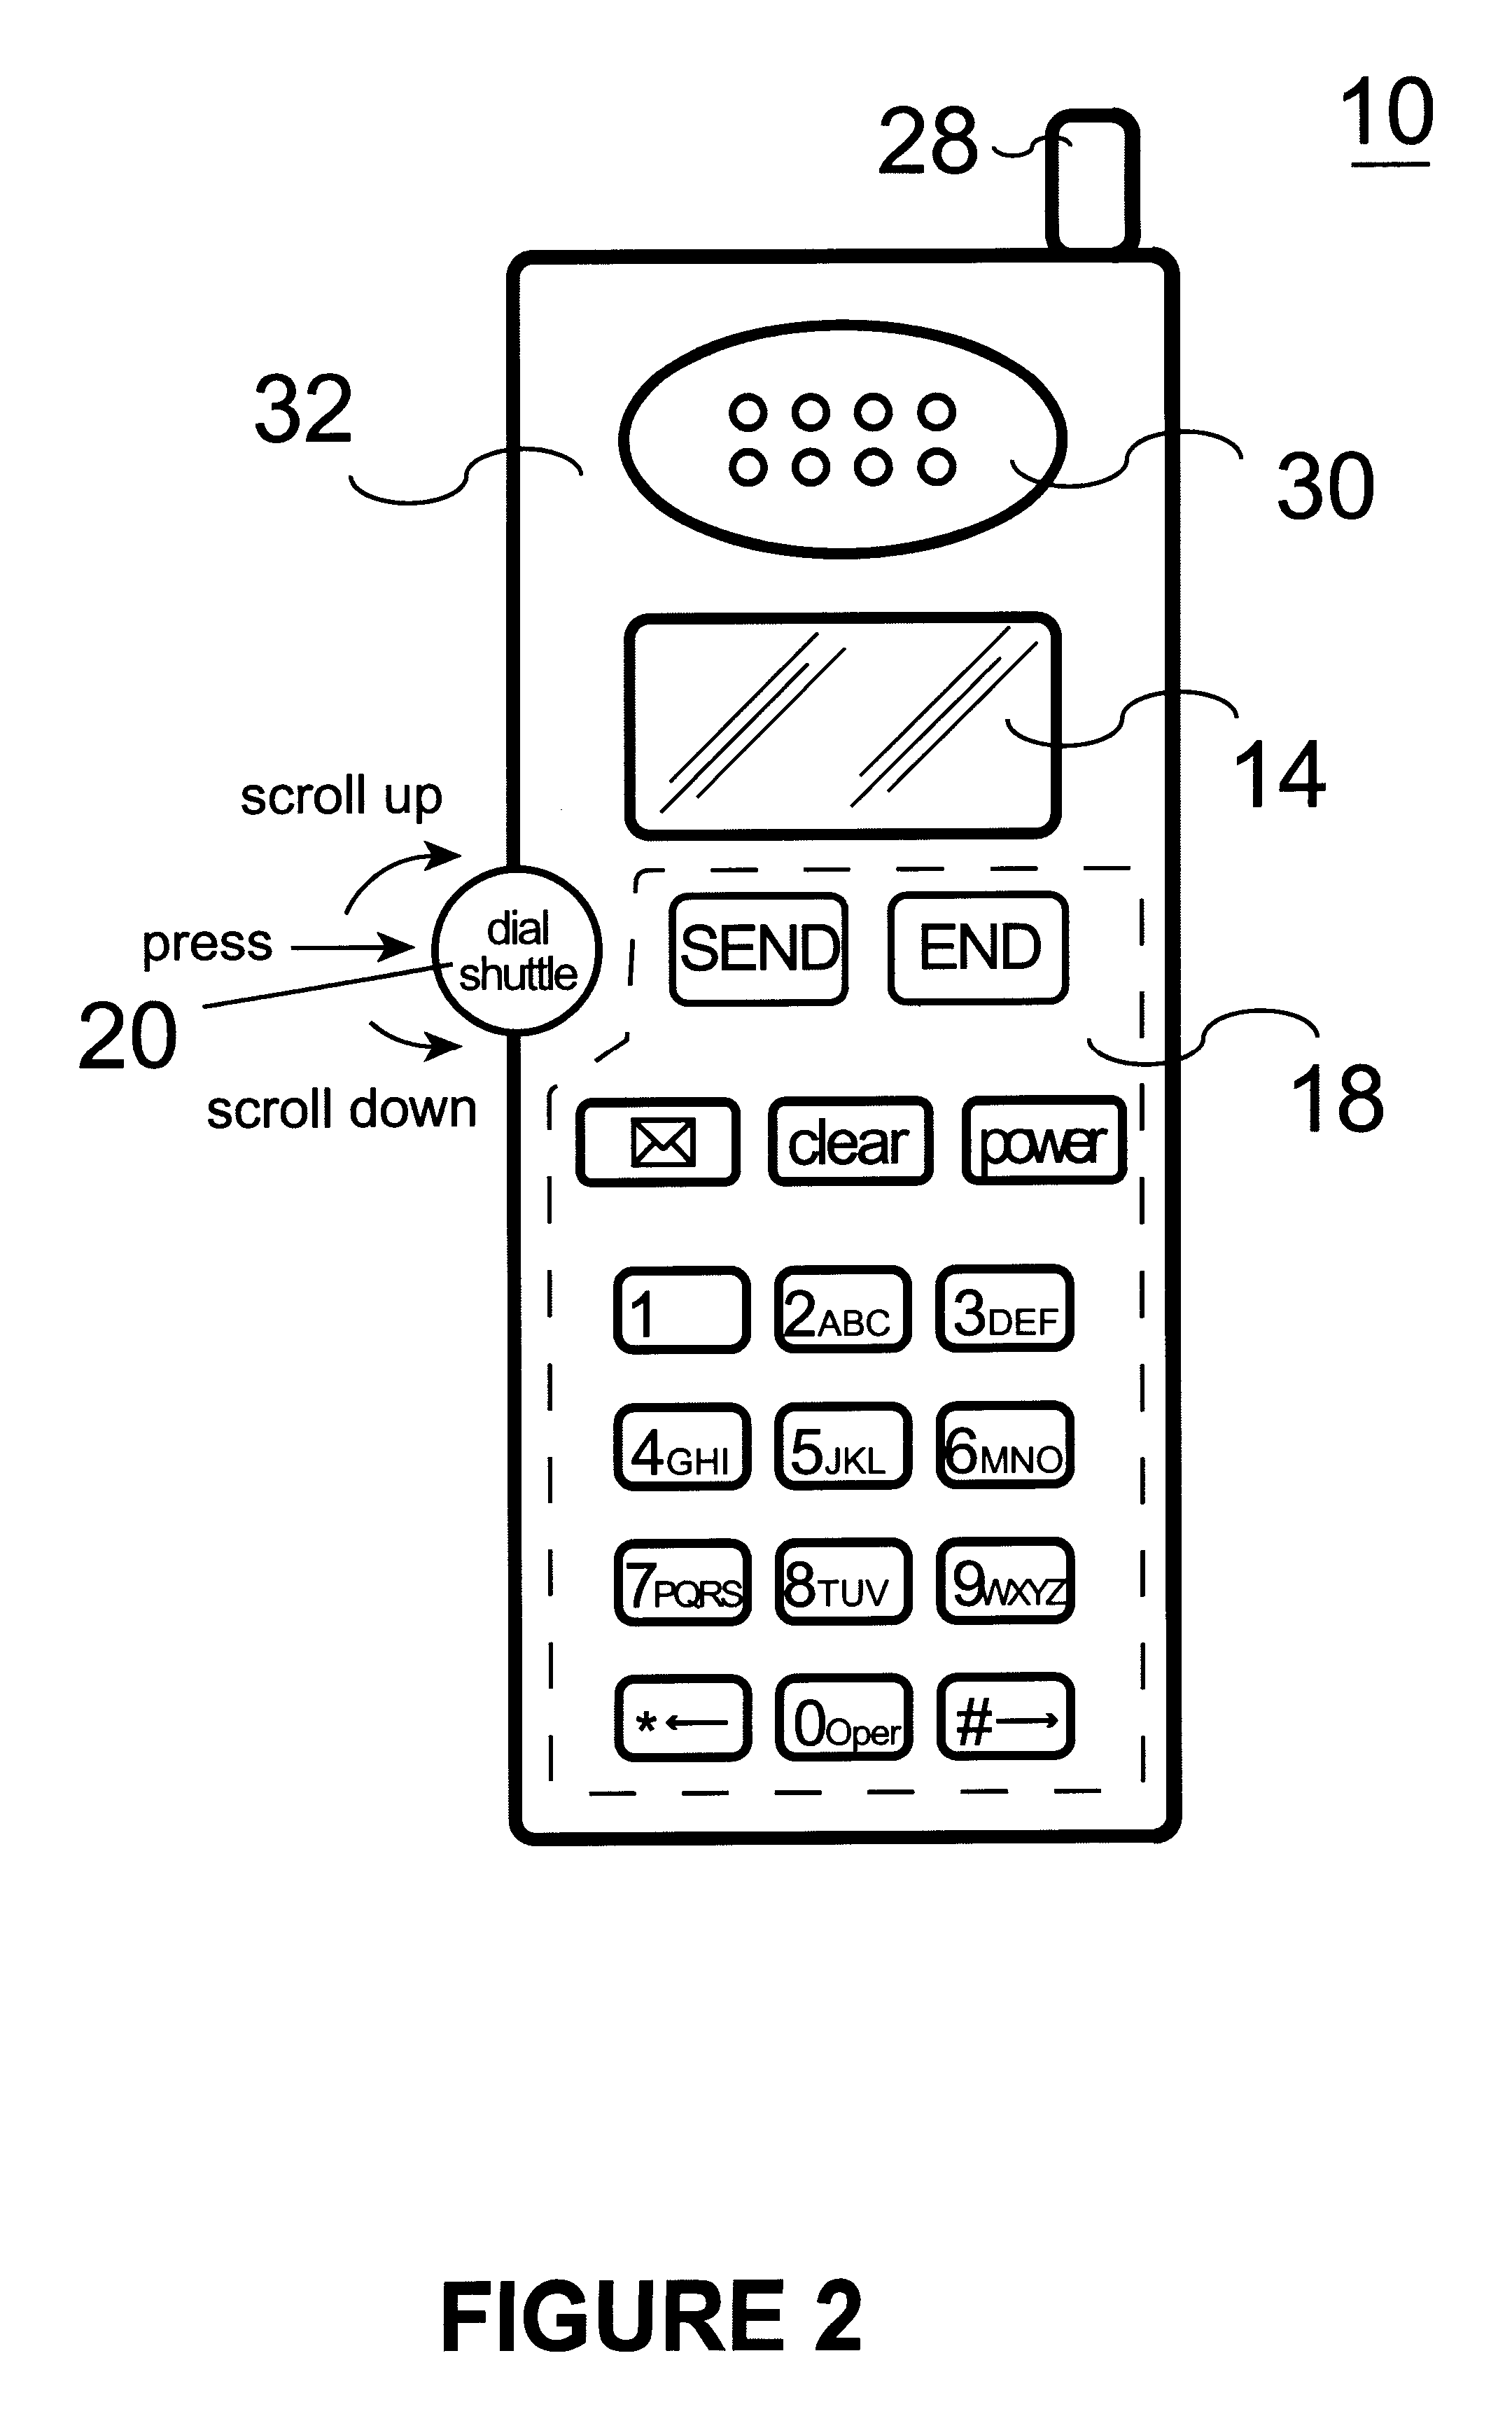 Communication terminal apparatus and method for selecting options using a dial shuttle